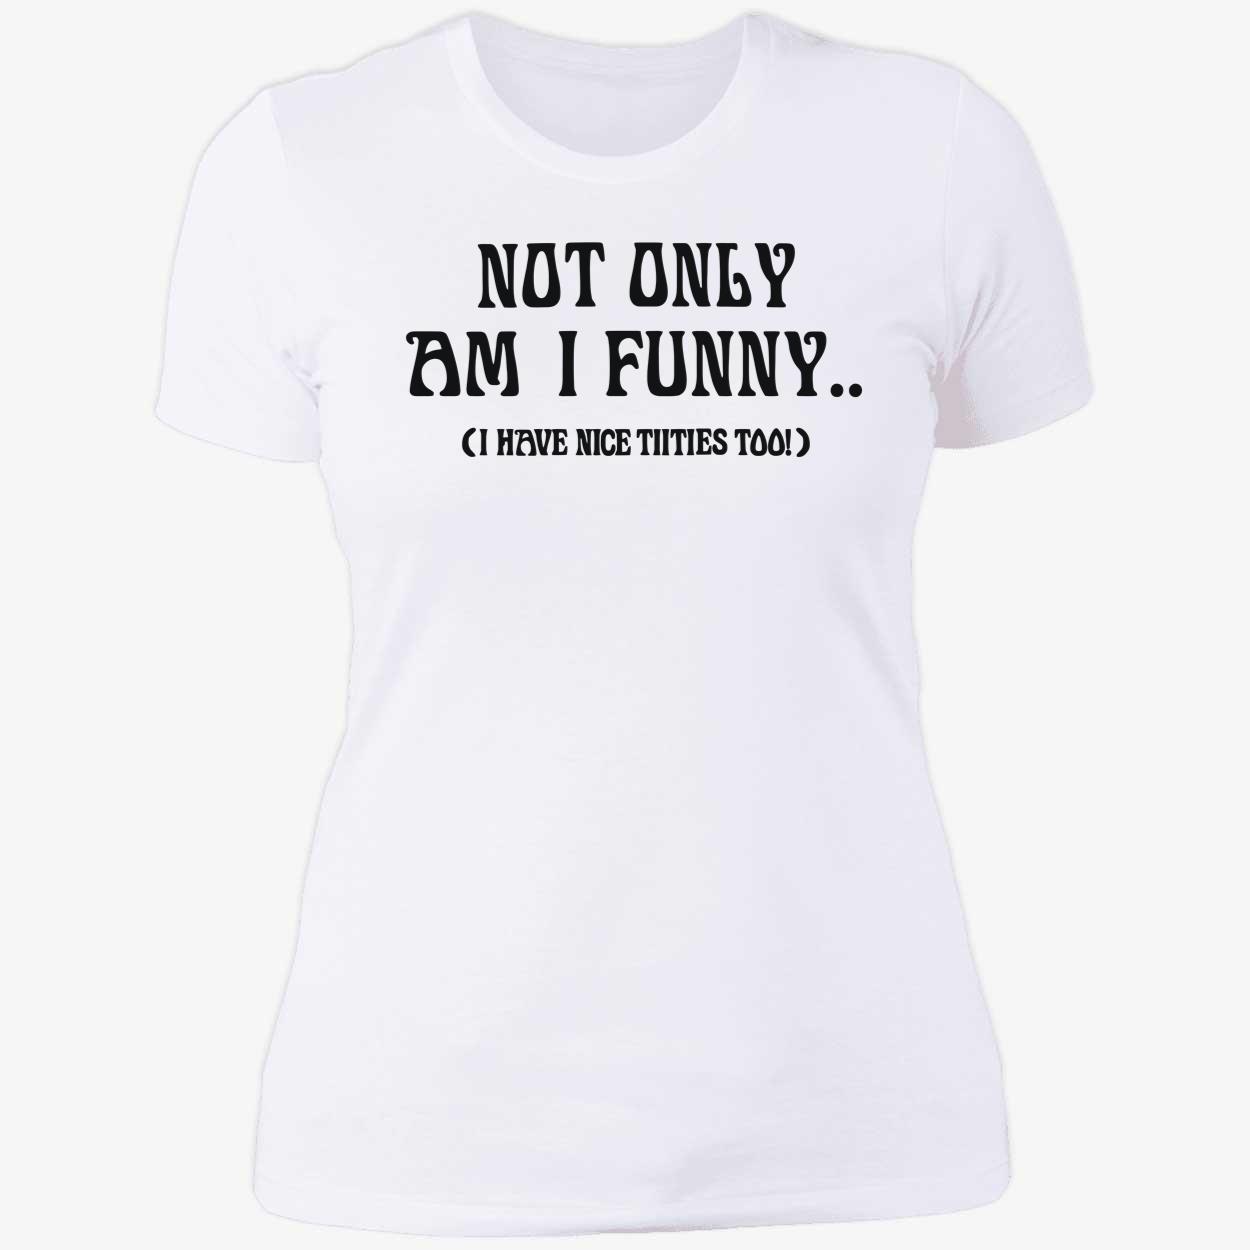 Not only am i funny i have nice titties too shirt 